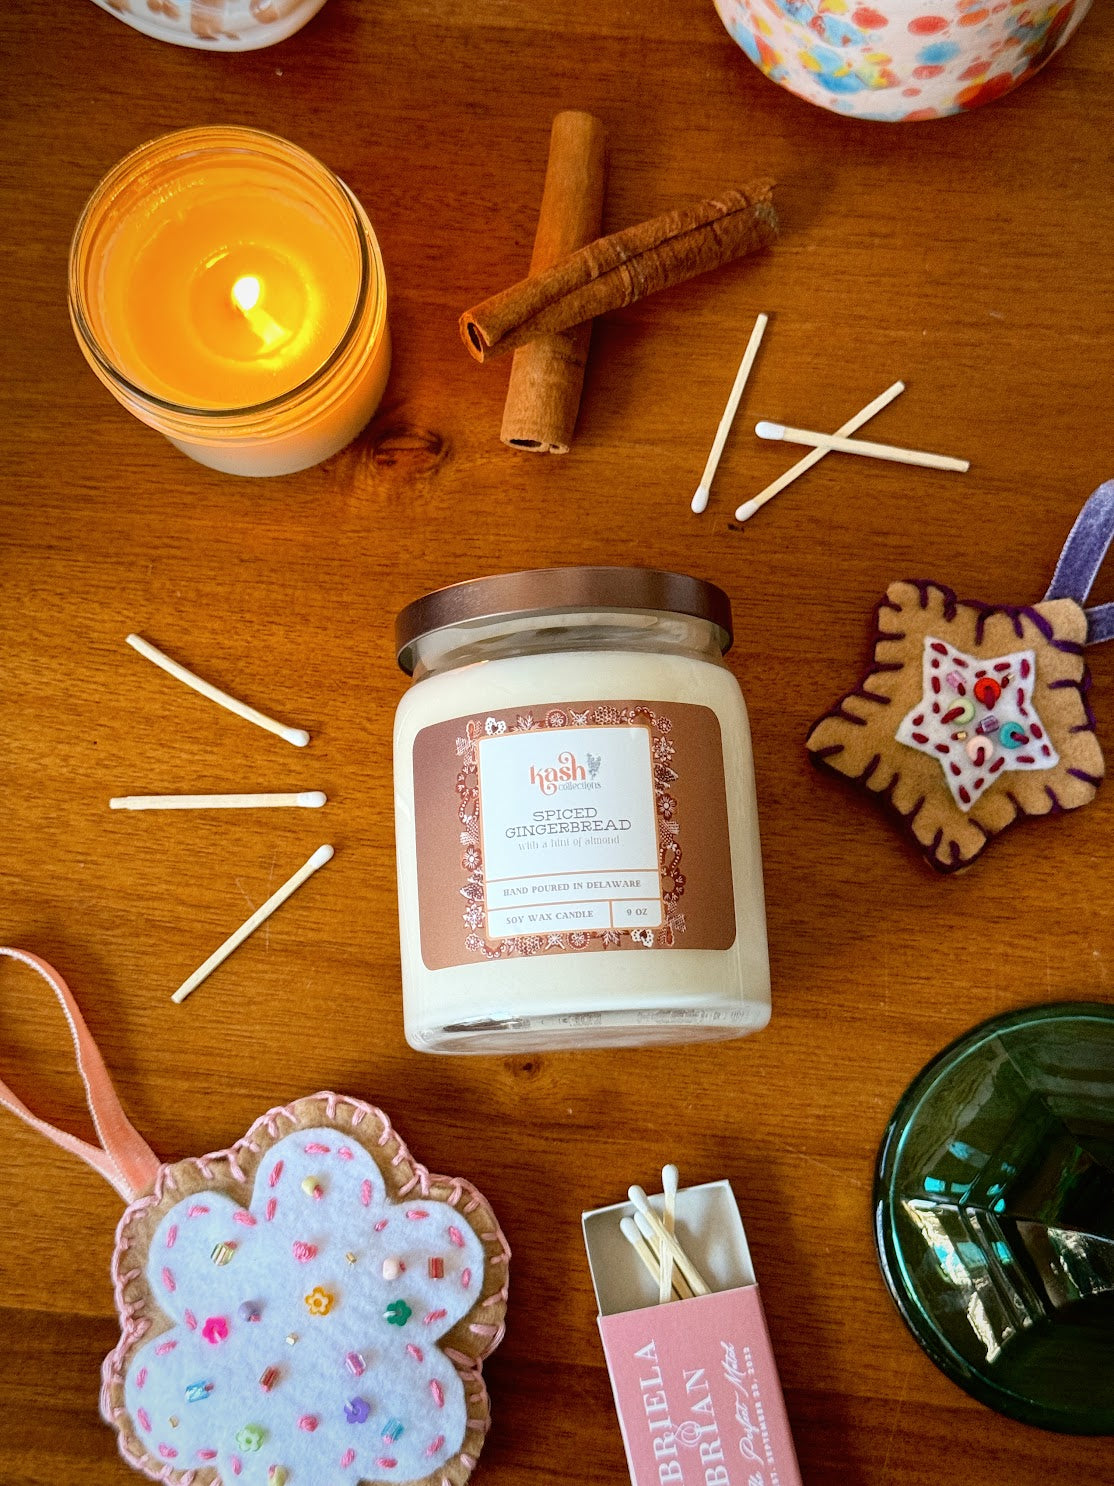 Spiced Gingerbread Candle